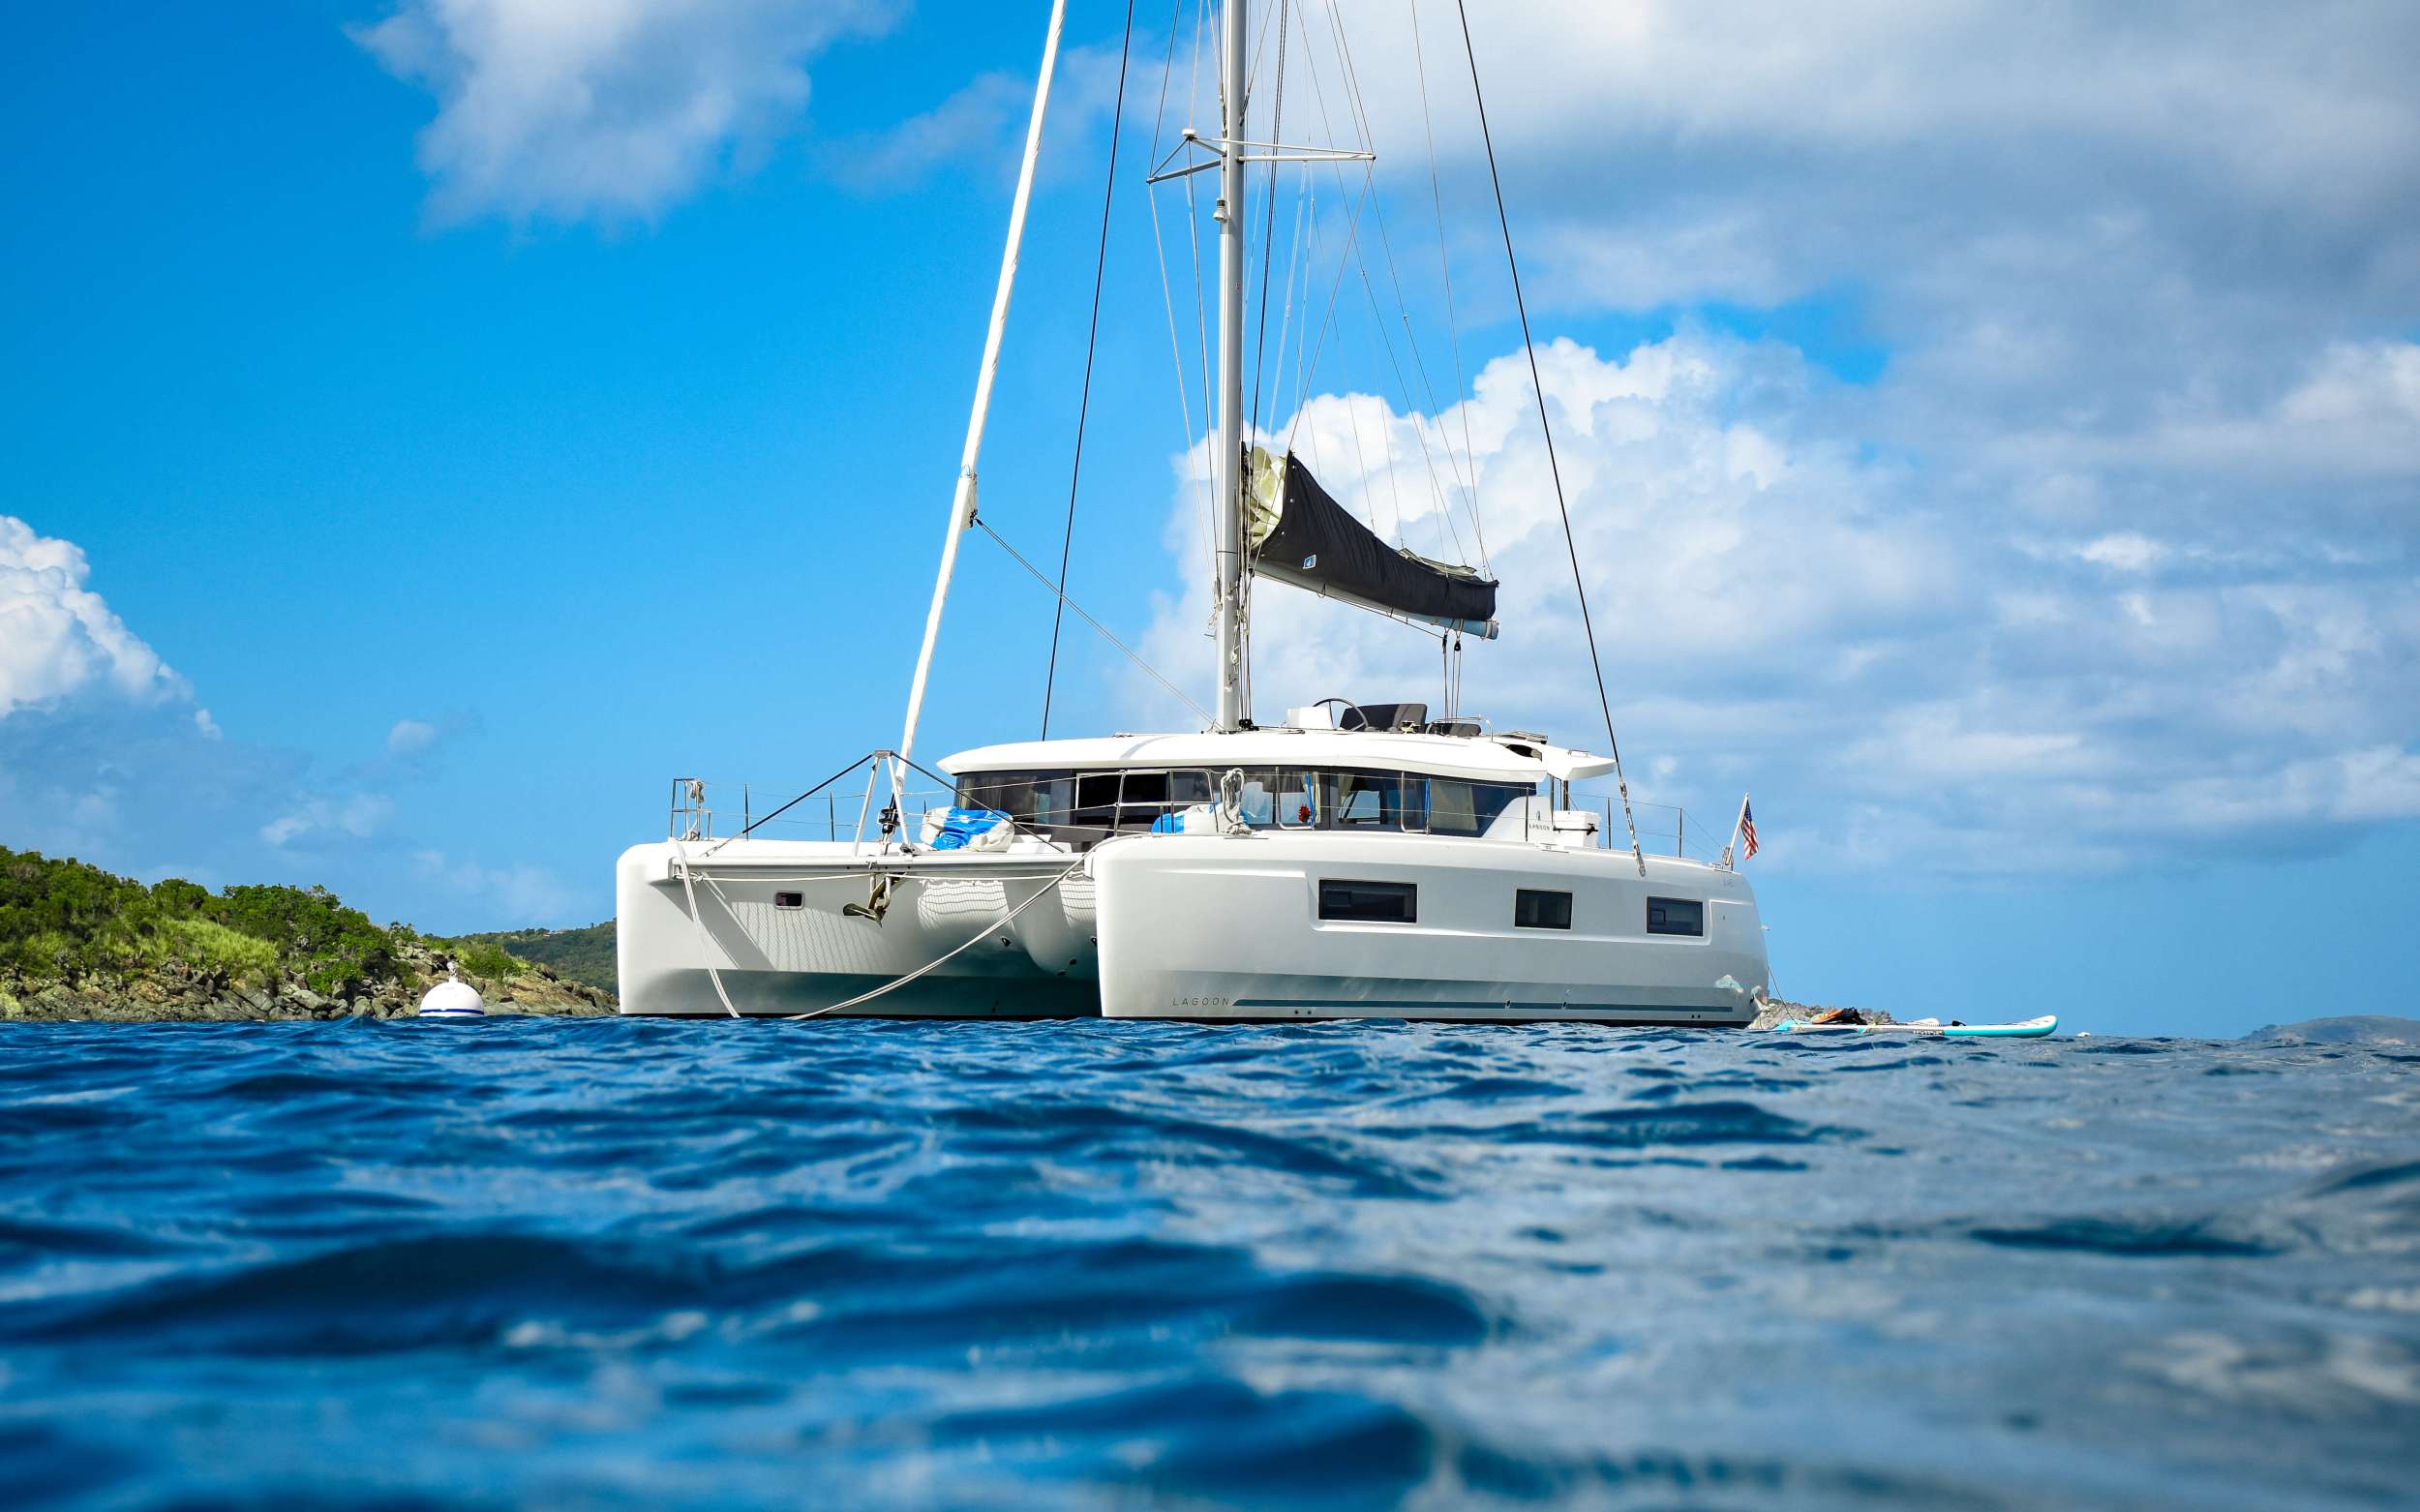 CELAVIE - Yacht Charter Saint Vincent and the Grenadines & Boat hire in Caribbean 2